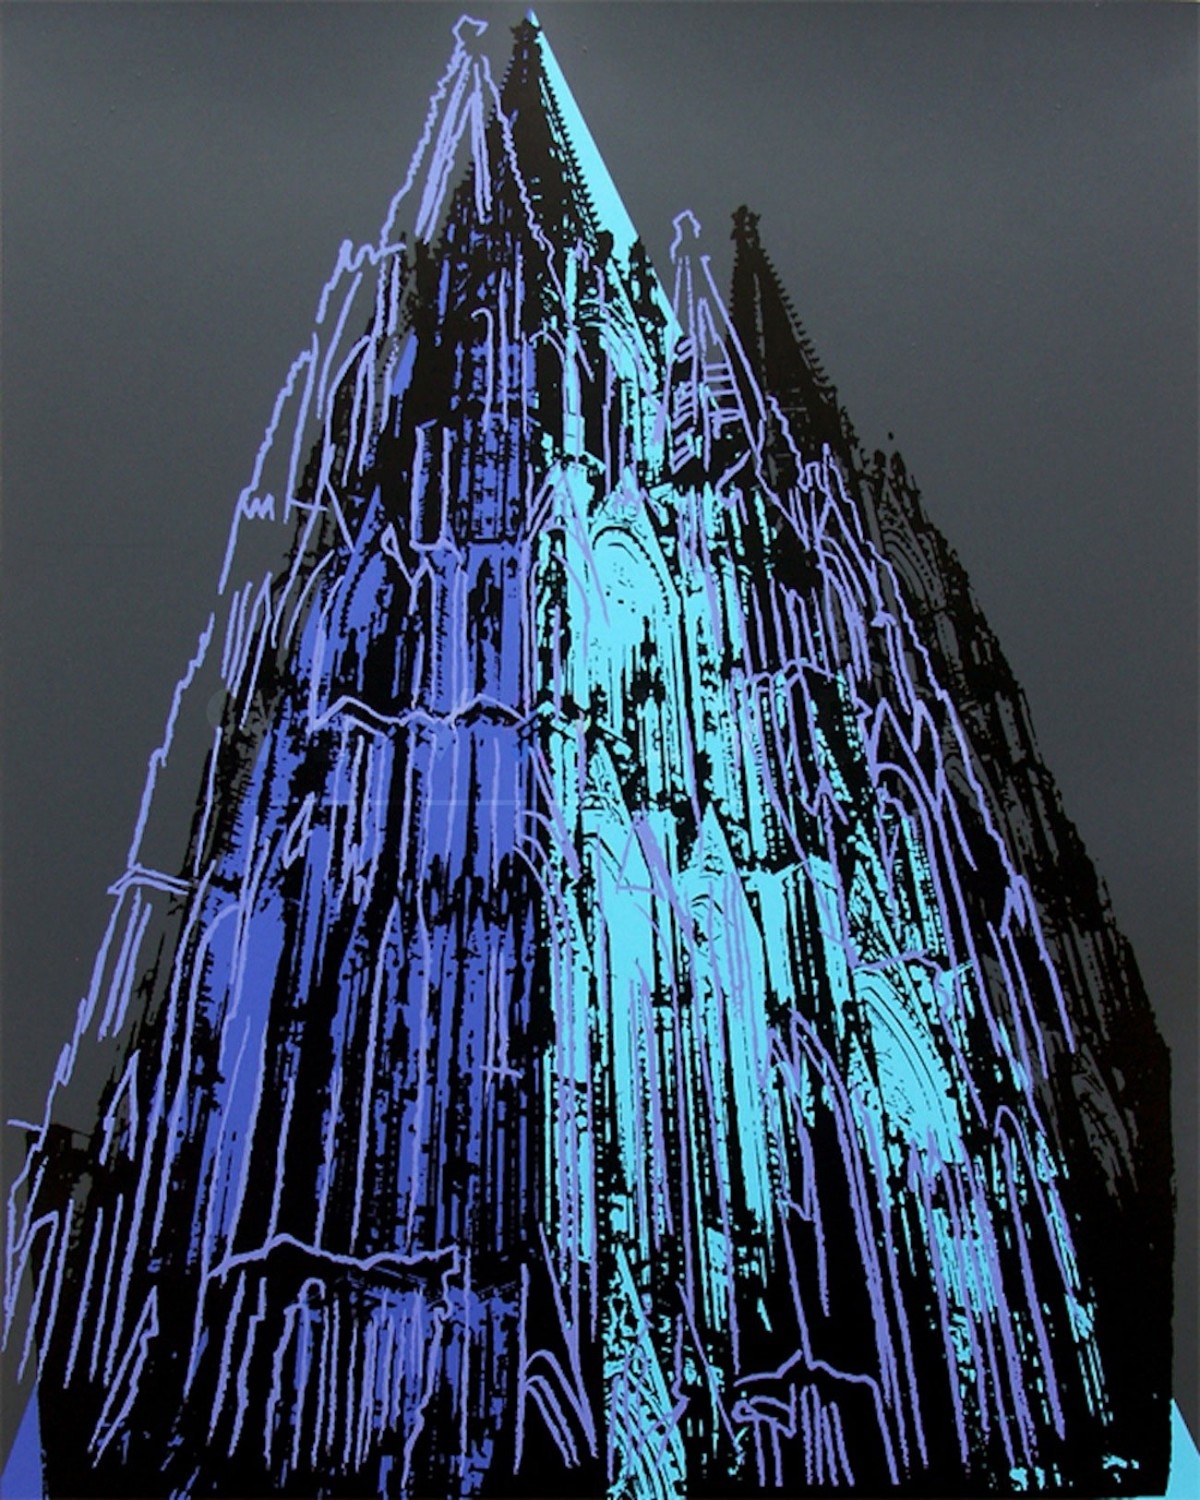 Andy Warhol | Cologne Cathedral | 362 | 1985 | Image of Artists' work.